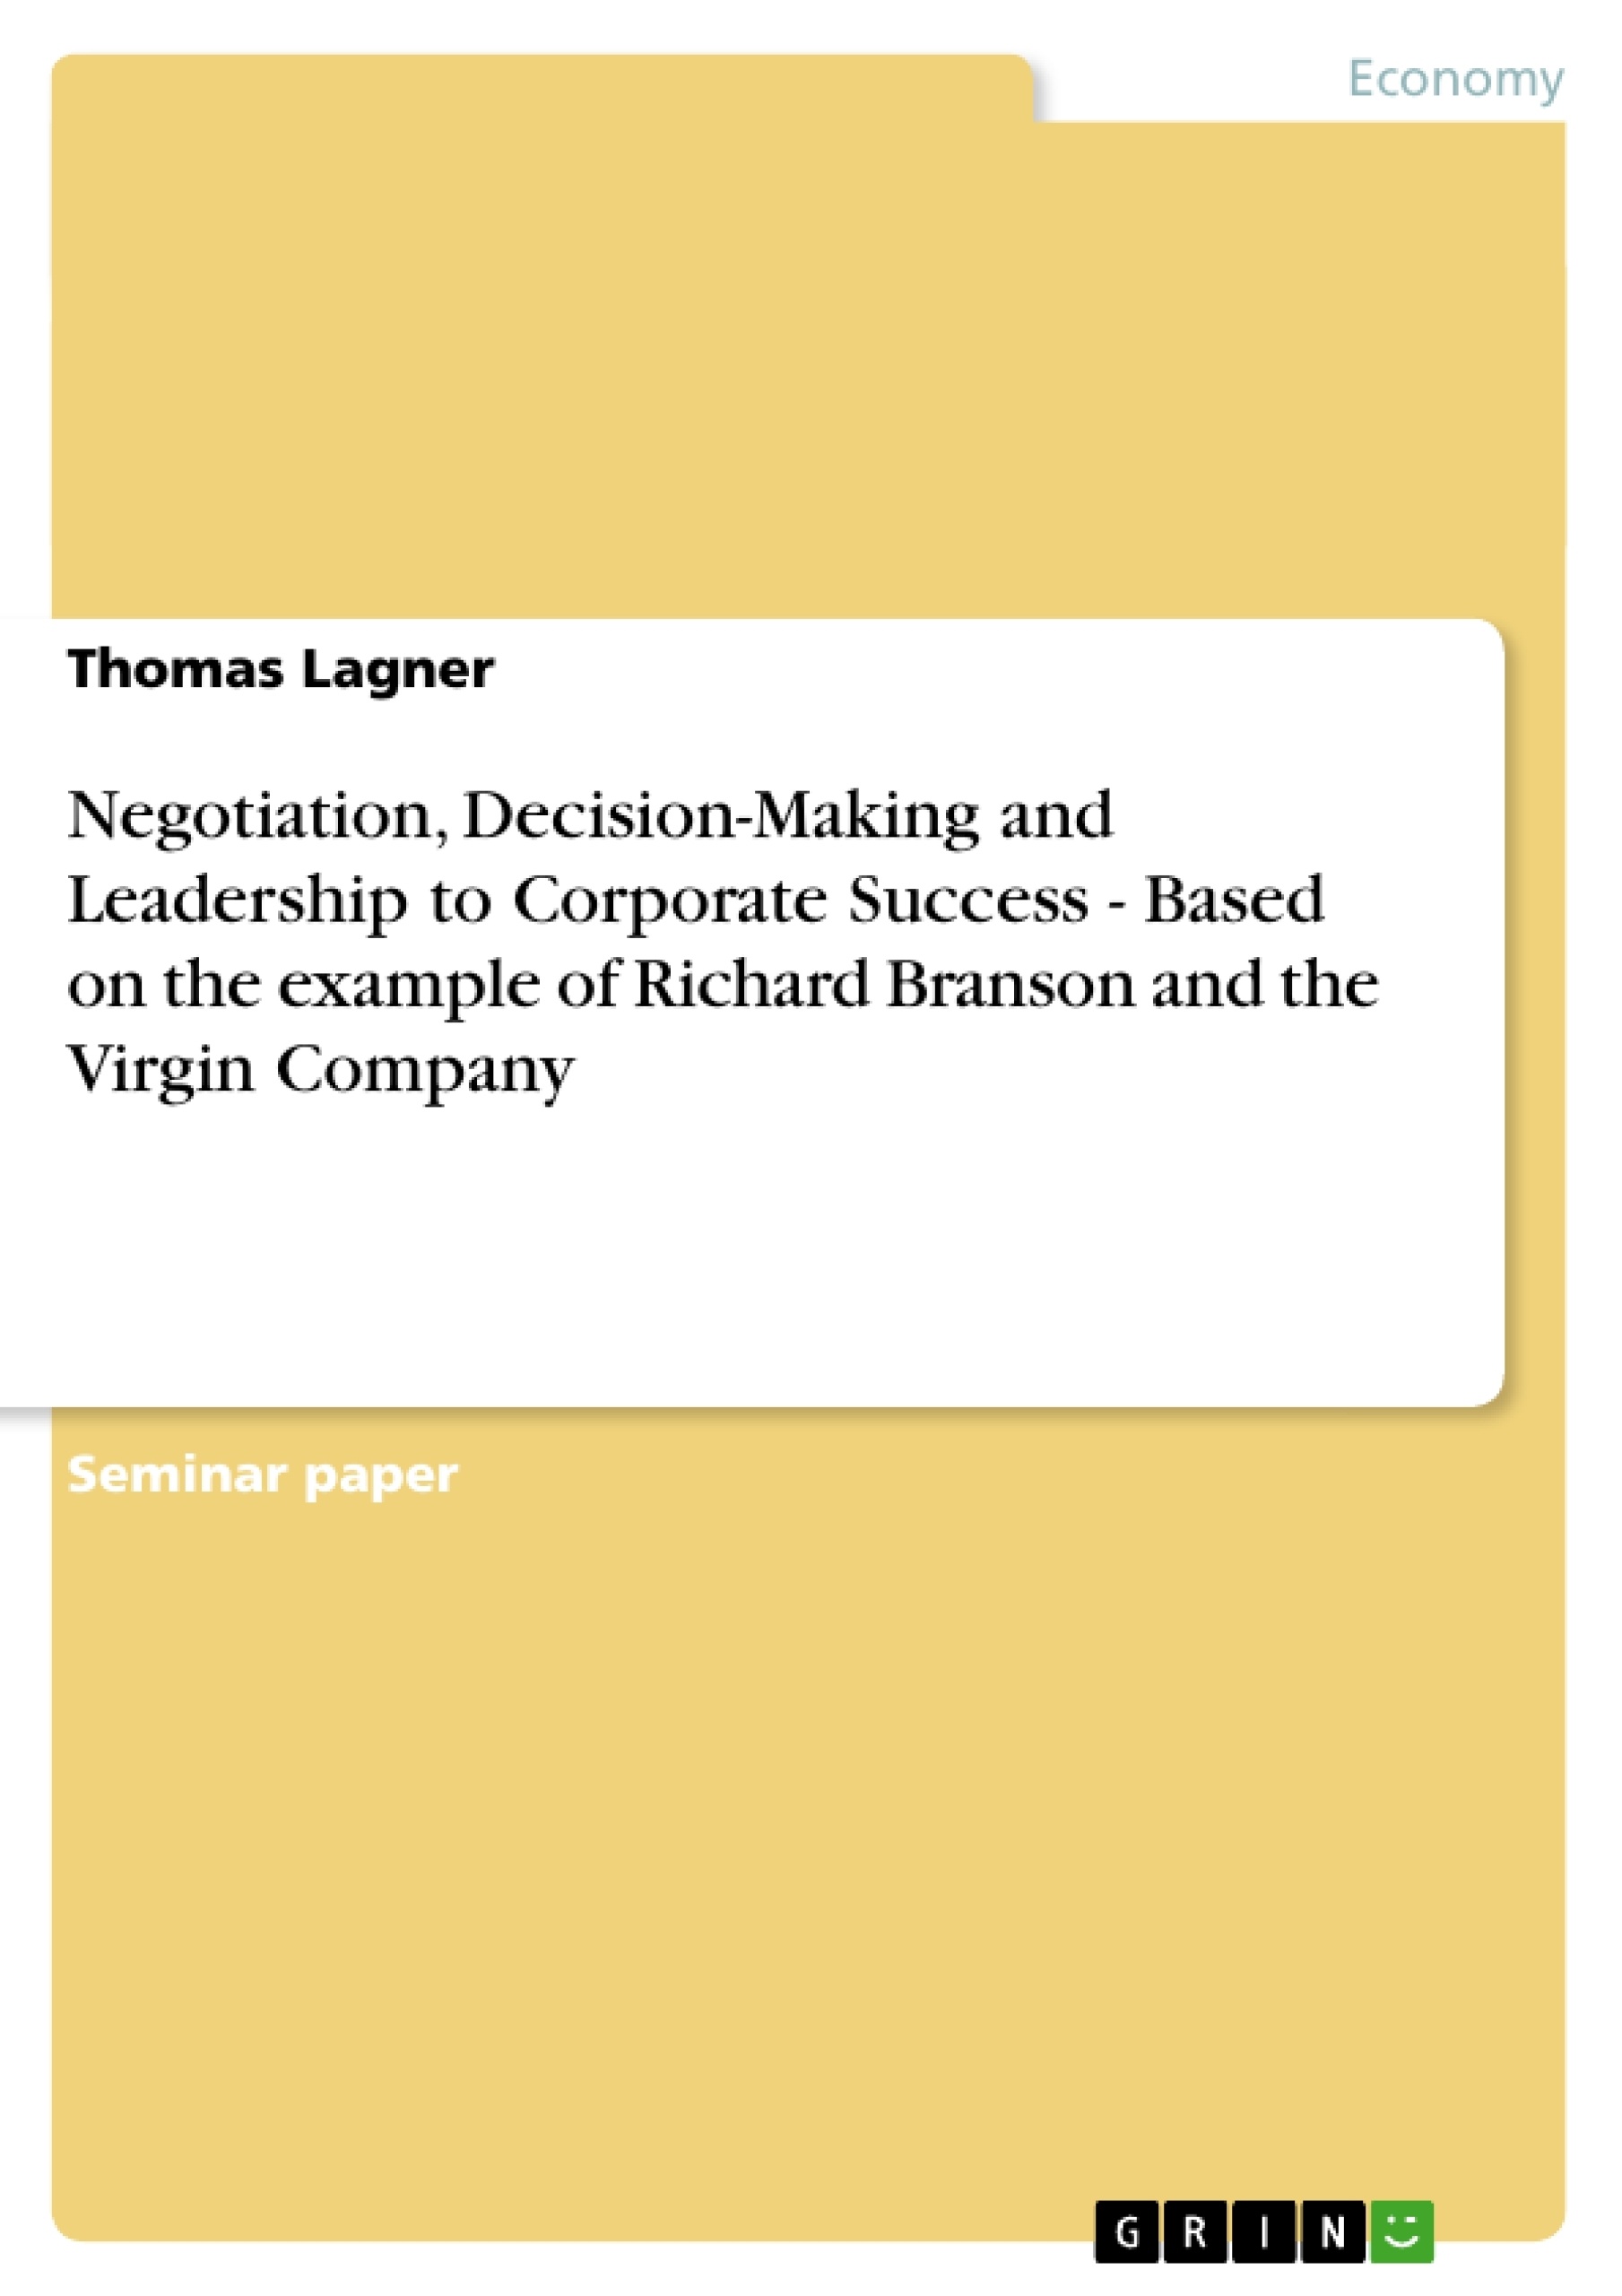 Title: Negotiation, Decision-Making and Leadership to Corporate Success - Based on the example of Richard Branson and the Virgin Company